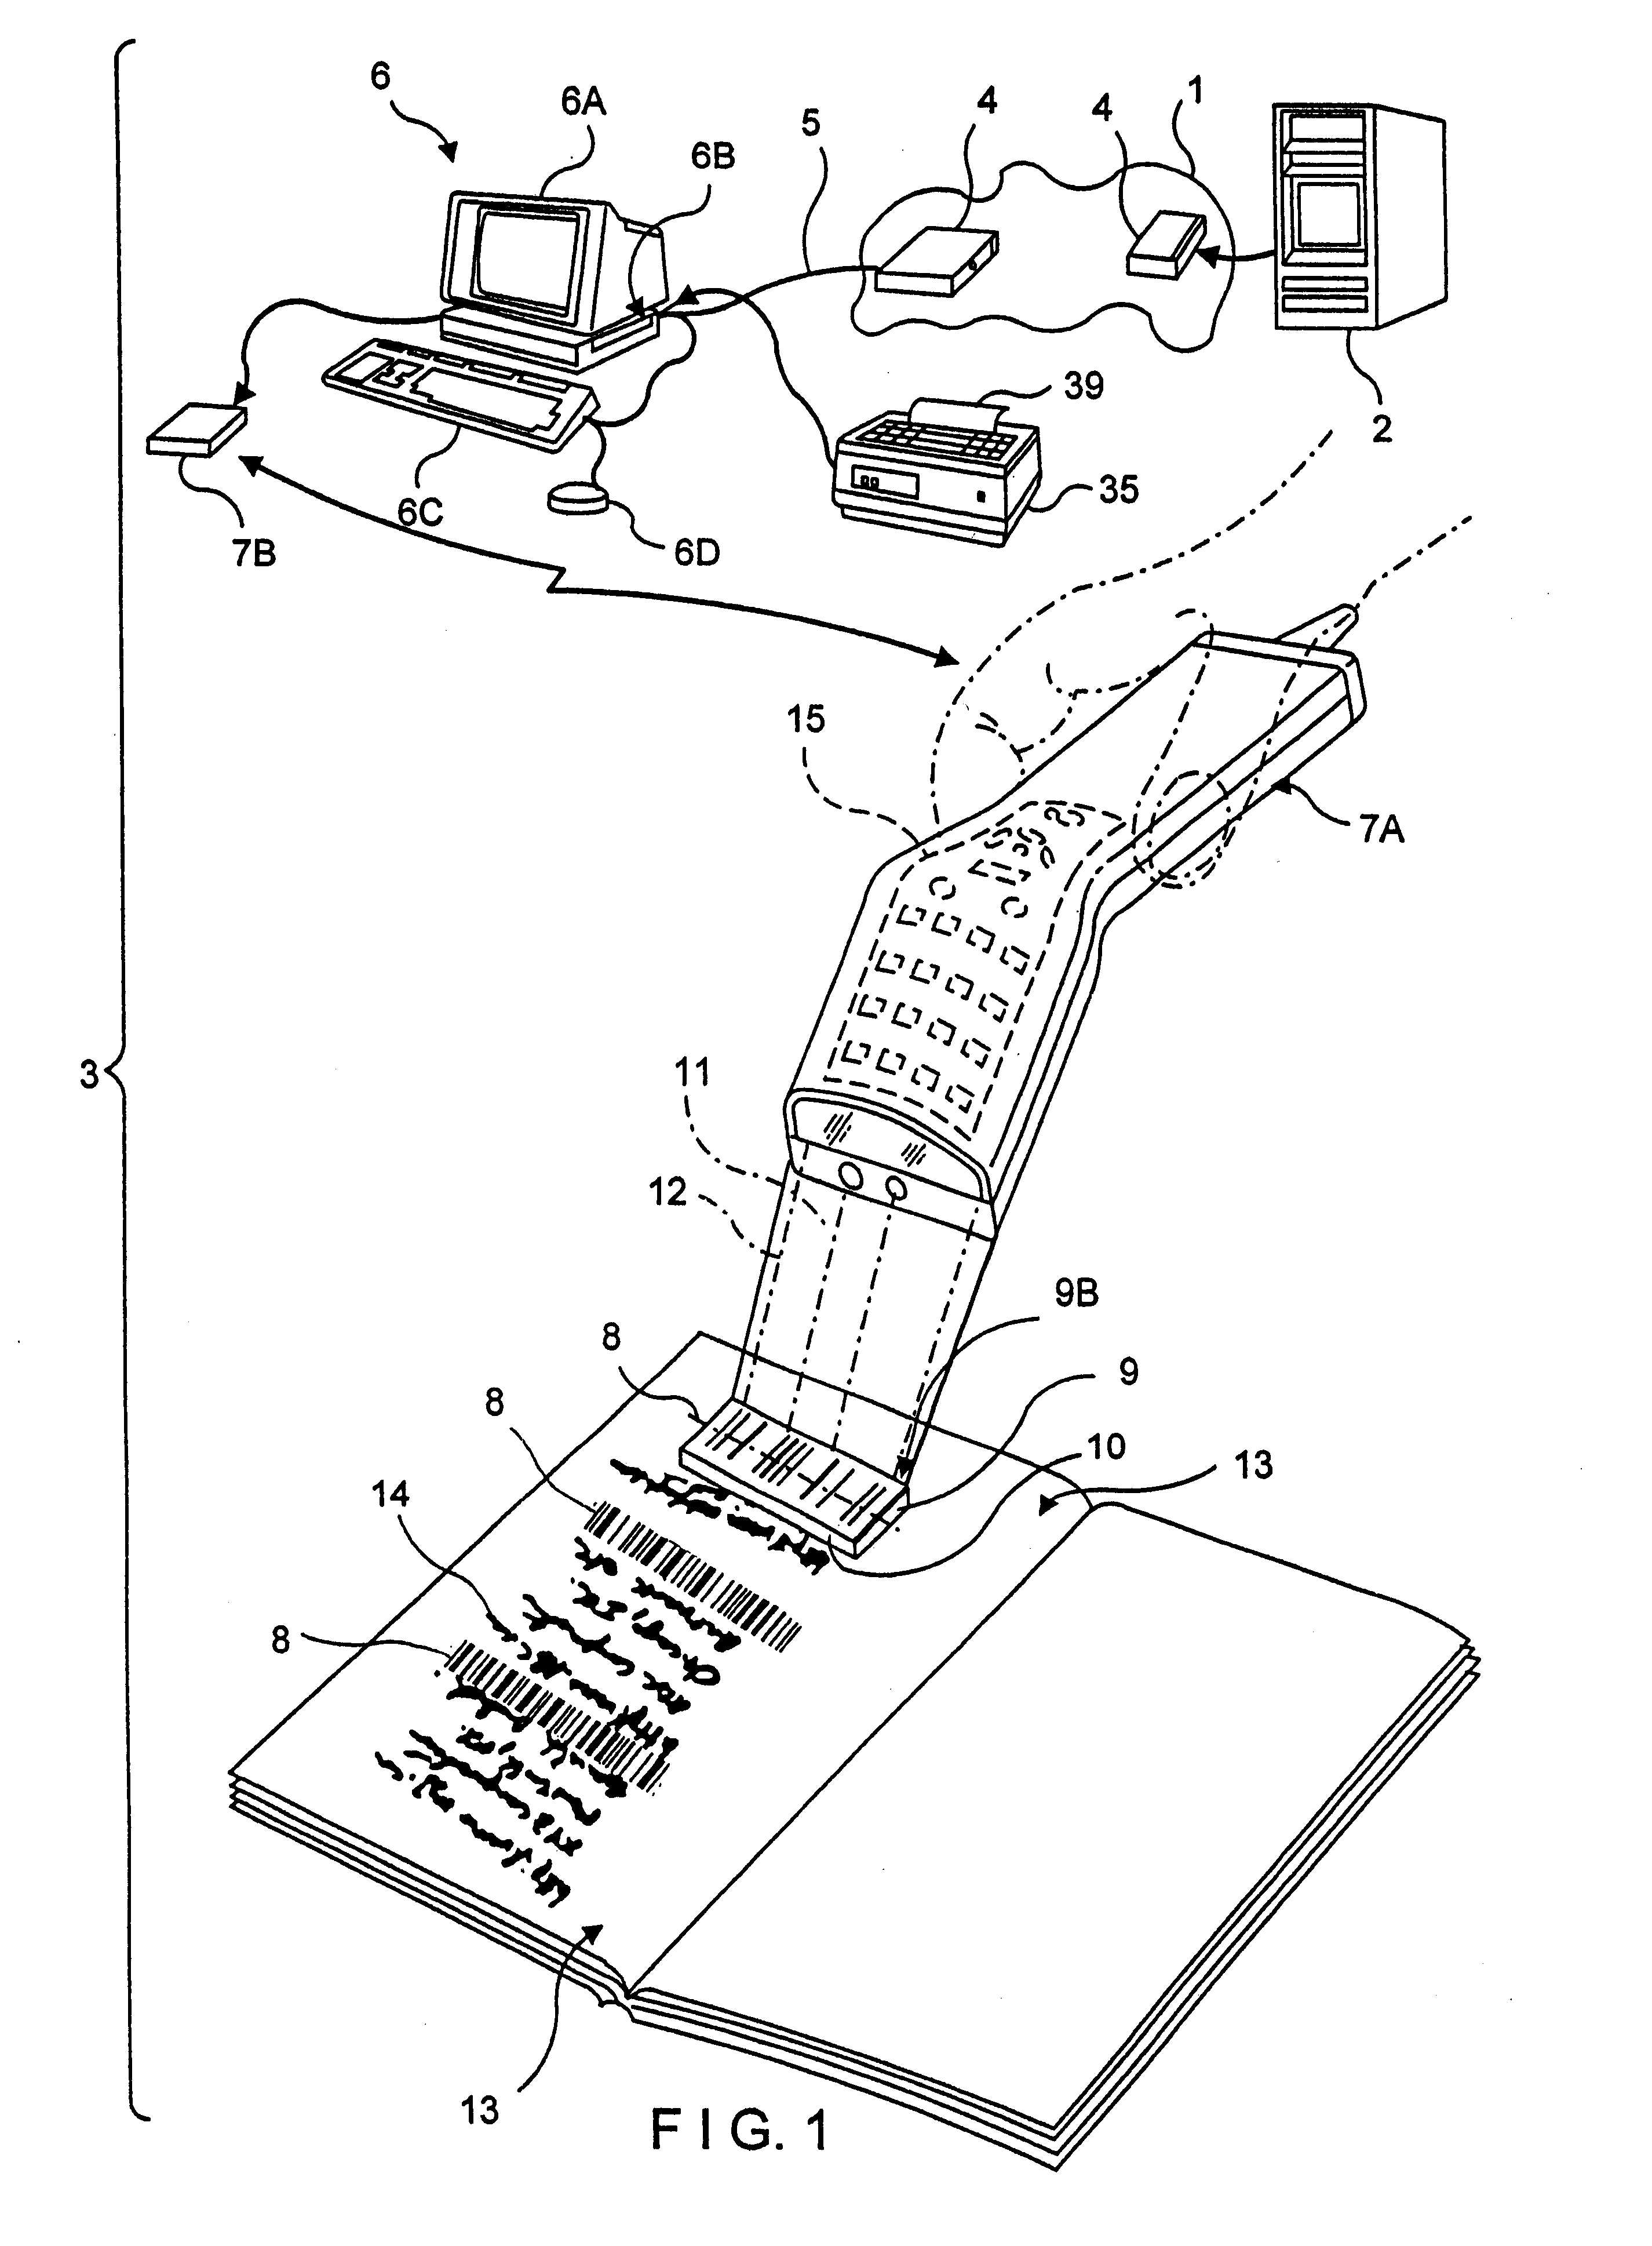 System and method for carrying out electronic-commerce transactions using web documents embodying electronic-commerce enabling applets automatically launched and executed in response to reading url-encoded symbols pointing thereto